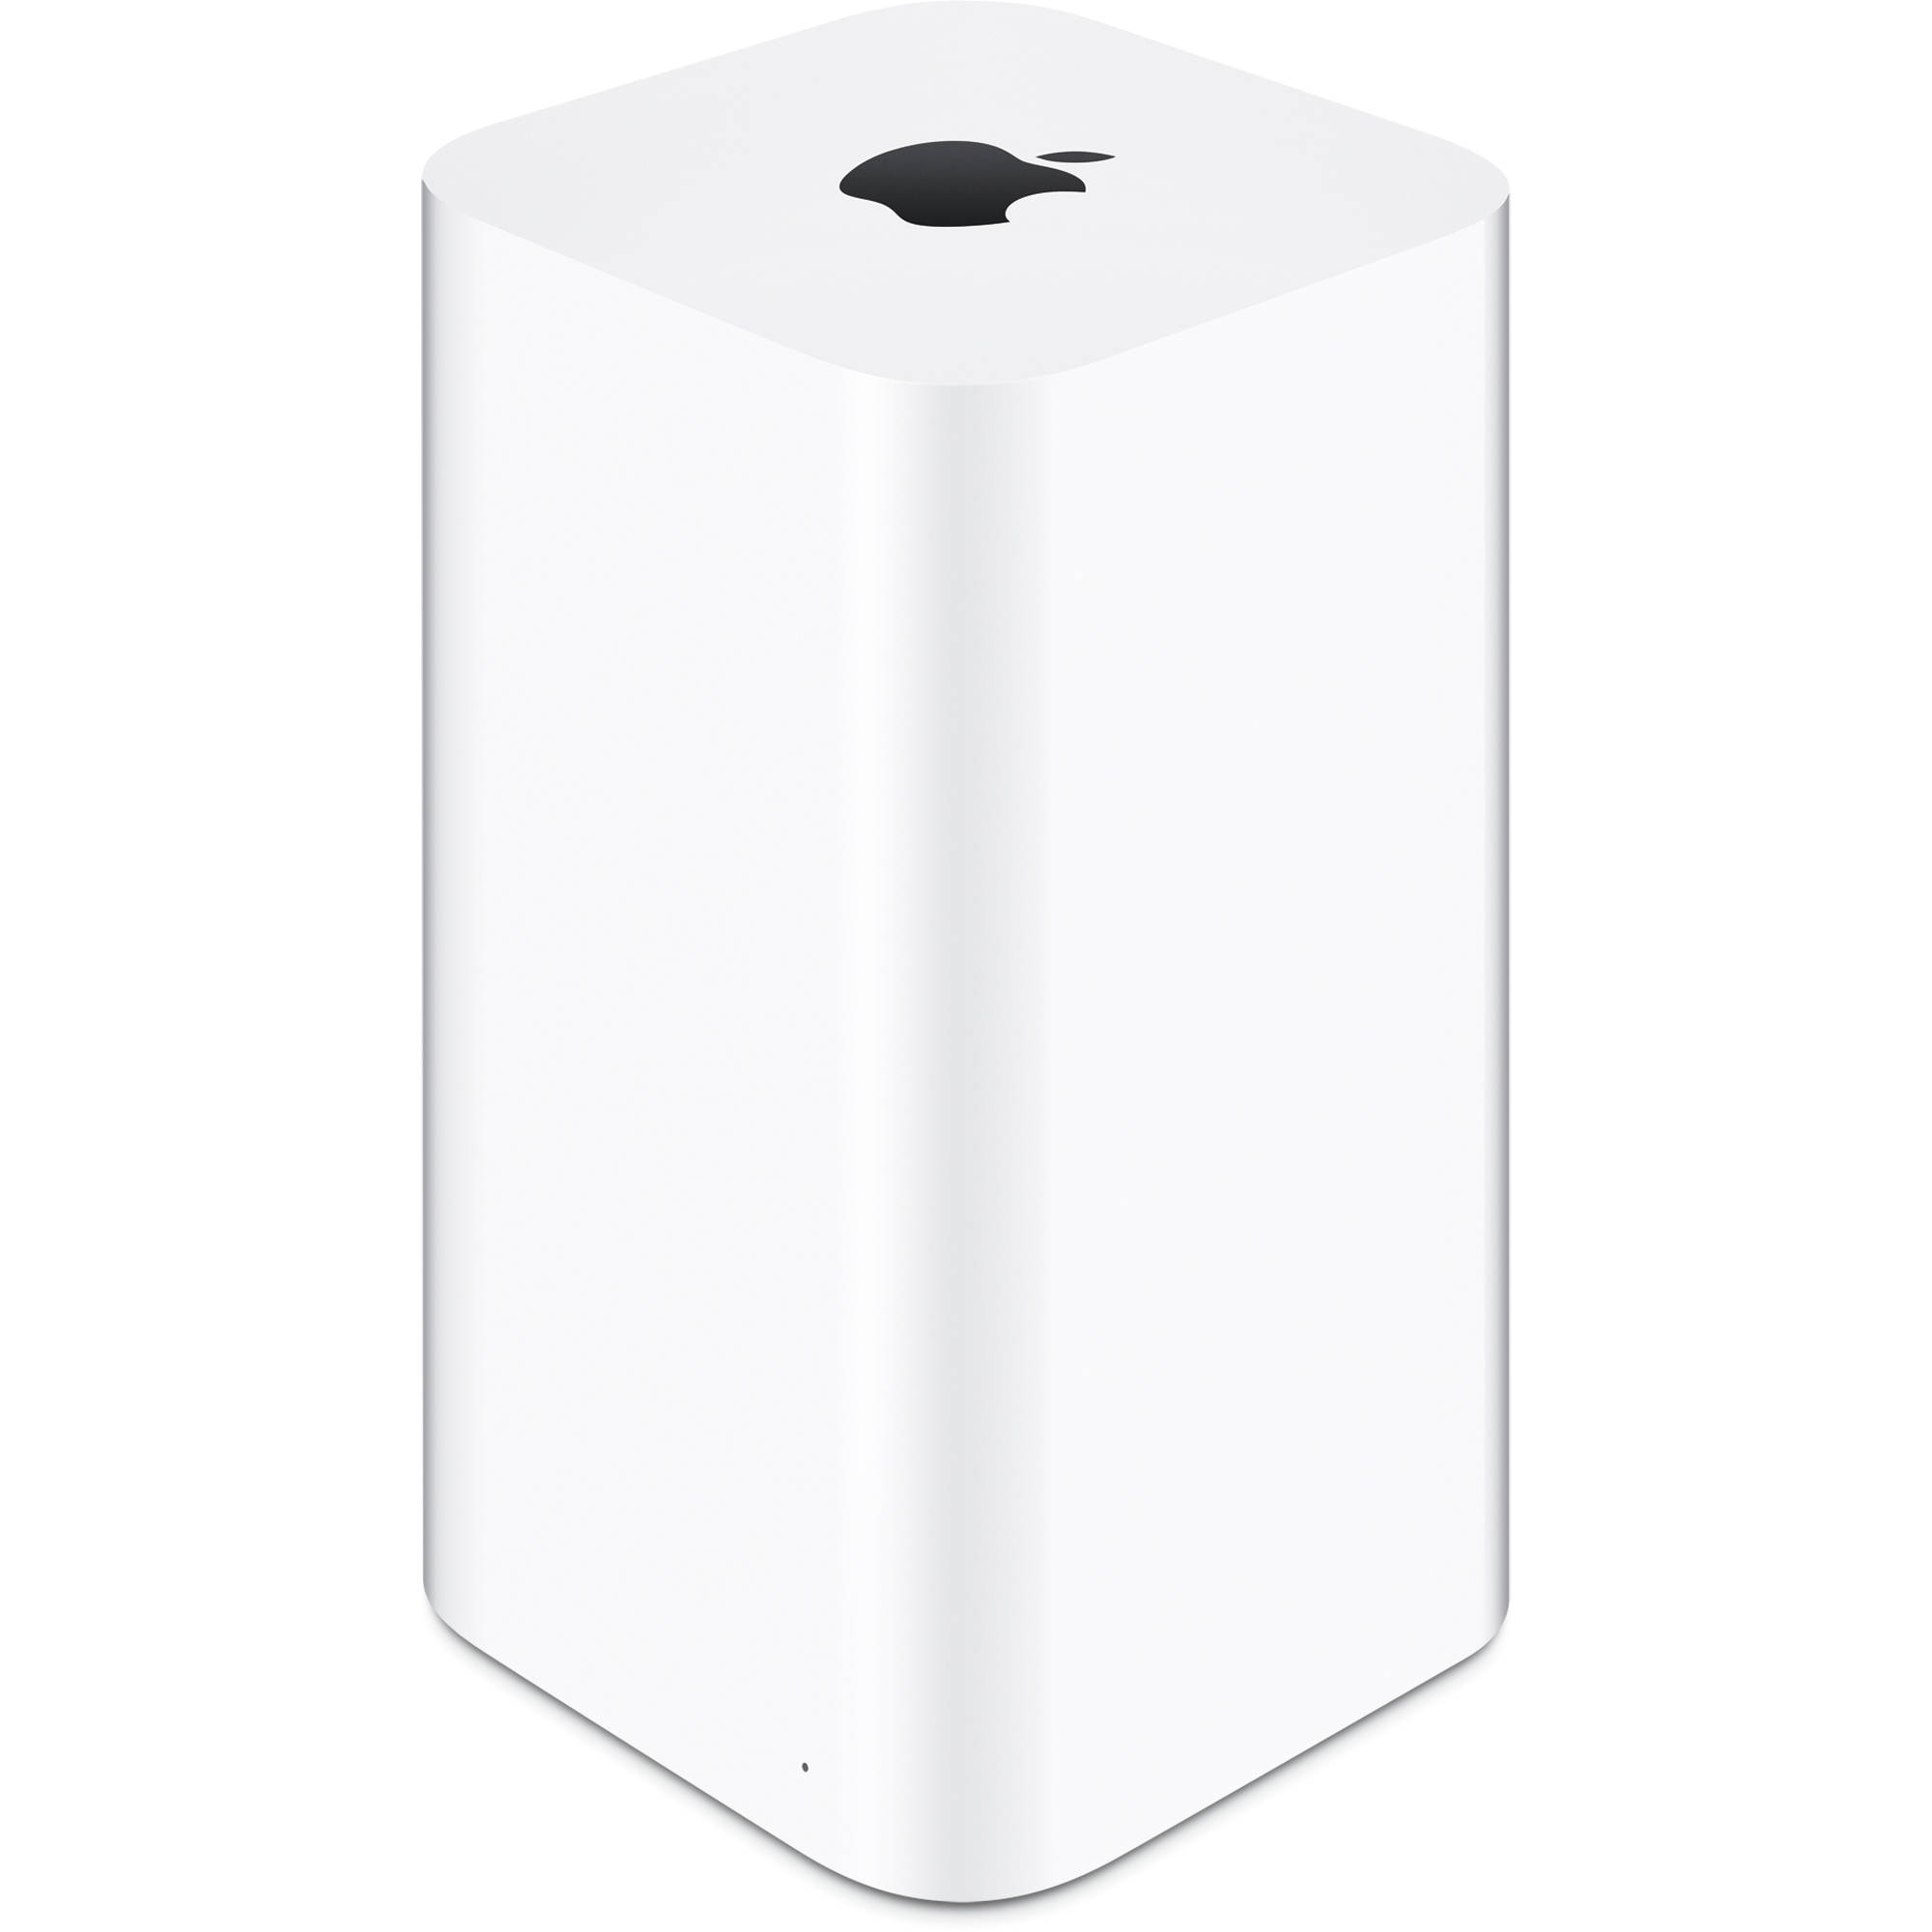 Apple 3TB AirPort Time Capsule (5th Generation) 